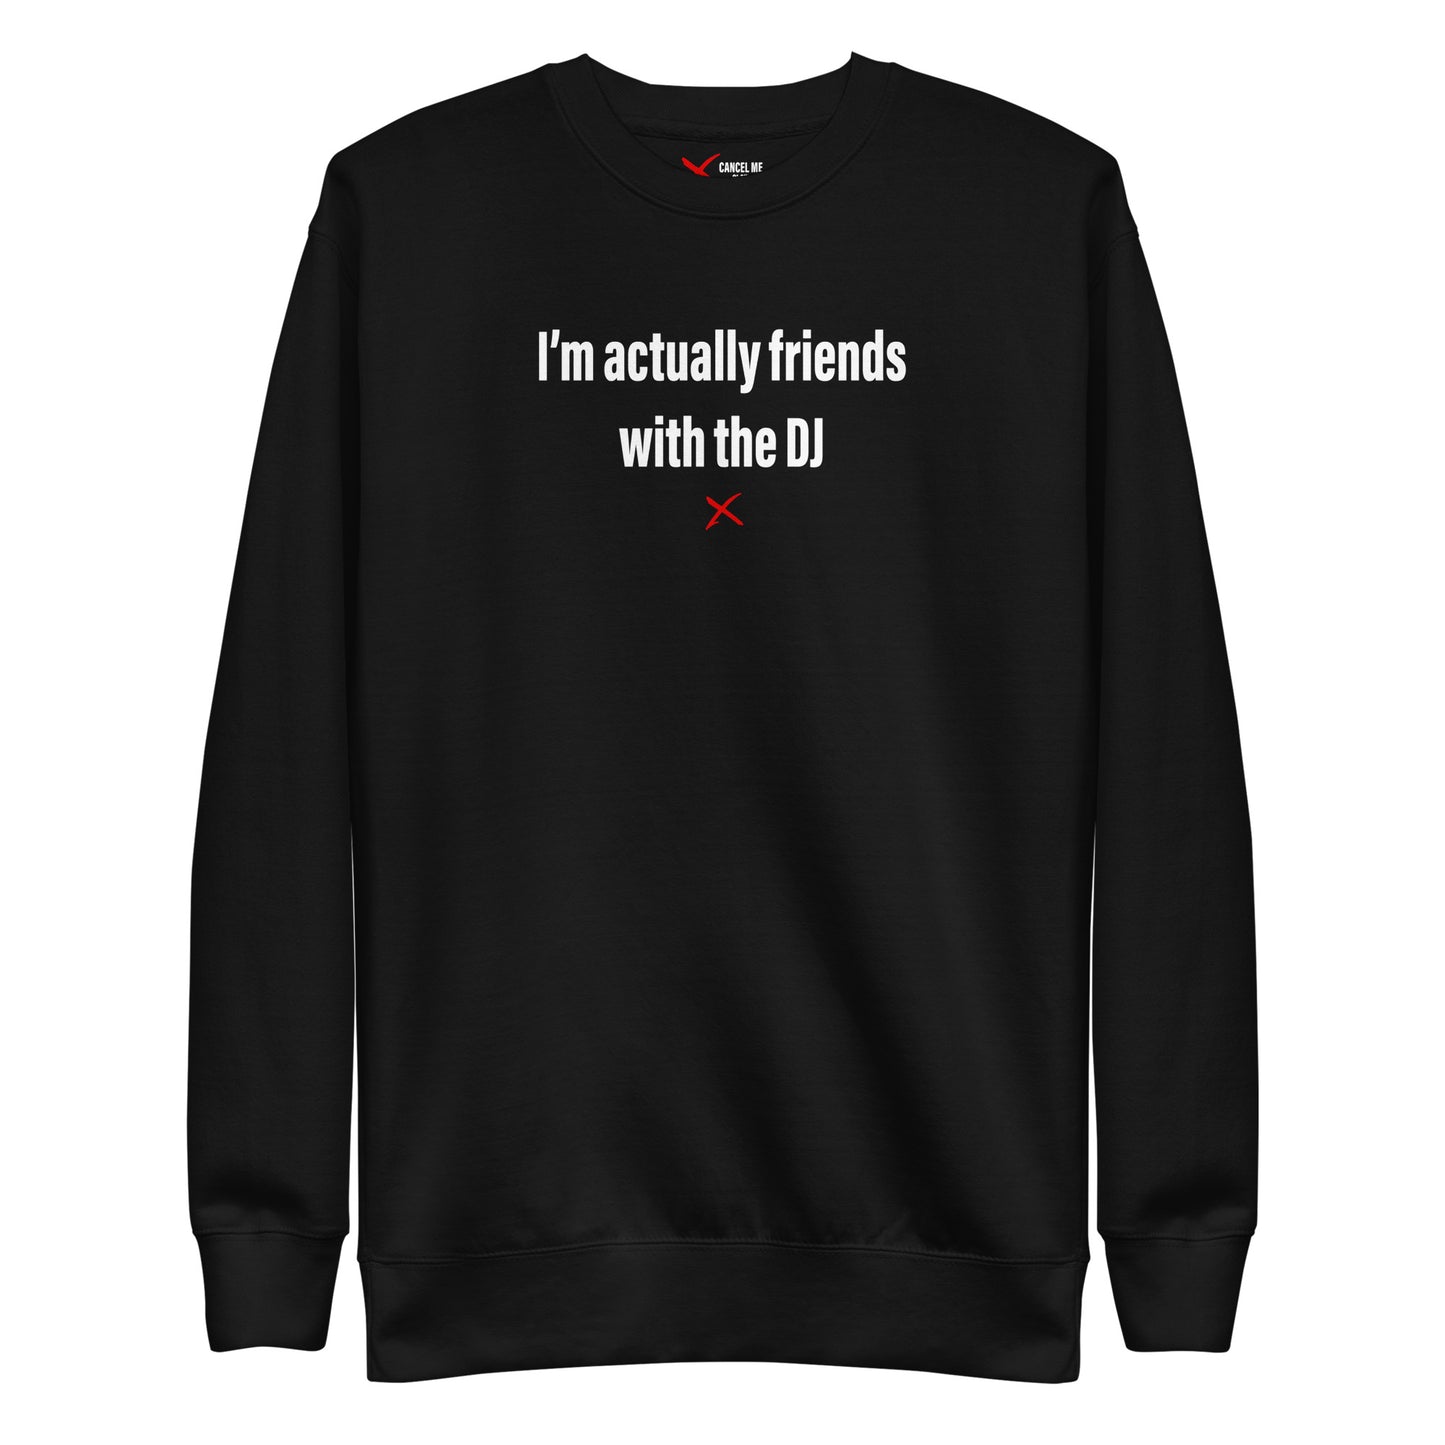 I'm actually friends with the DJ - Sweatshirt